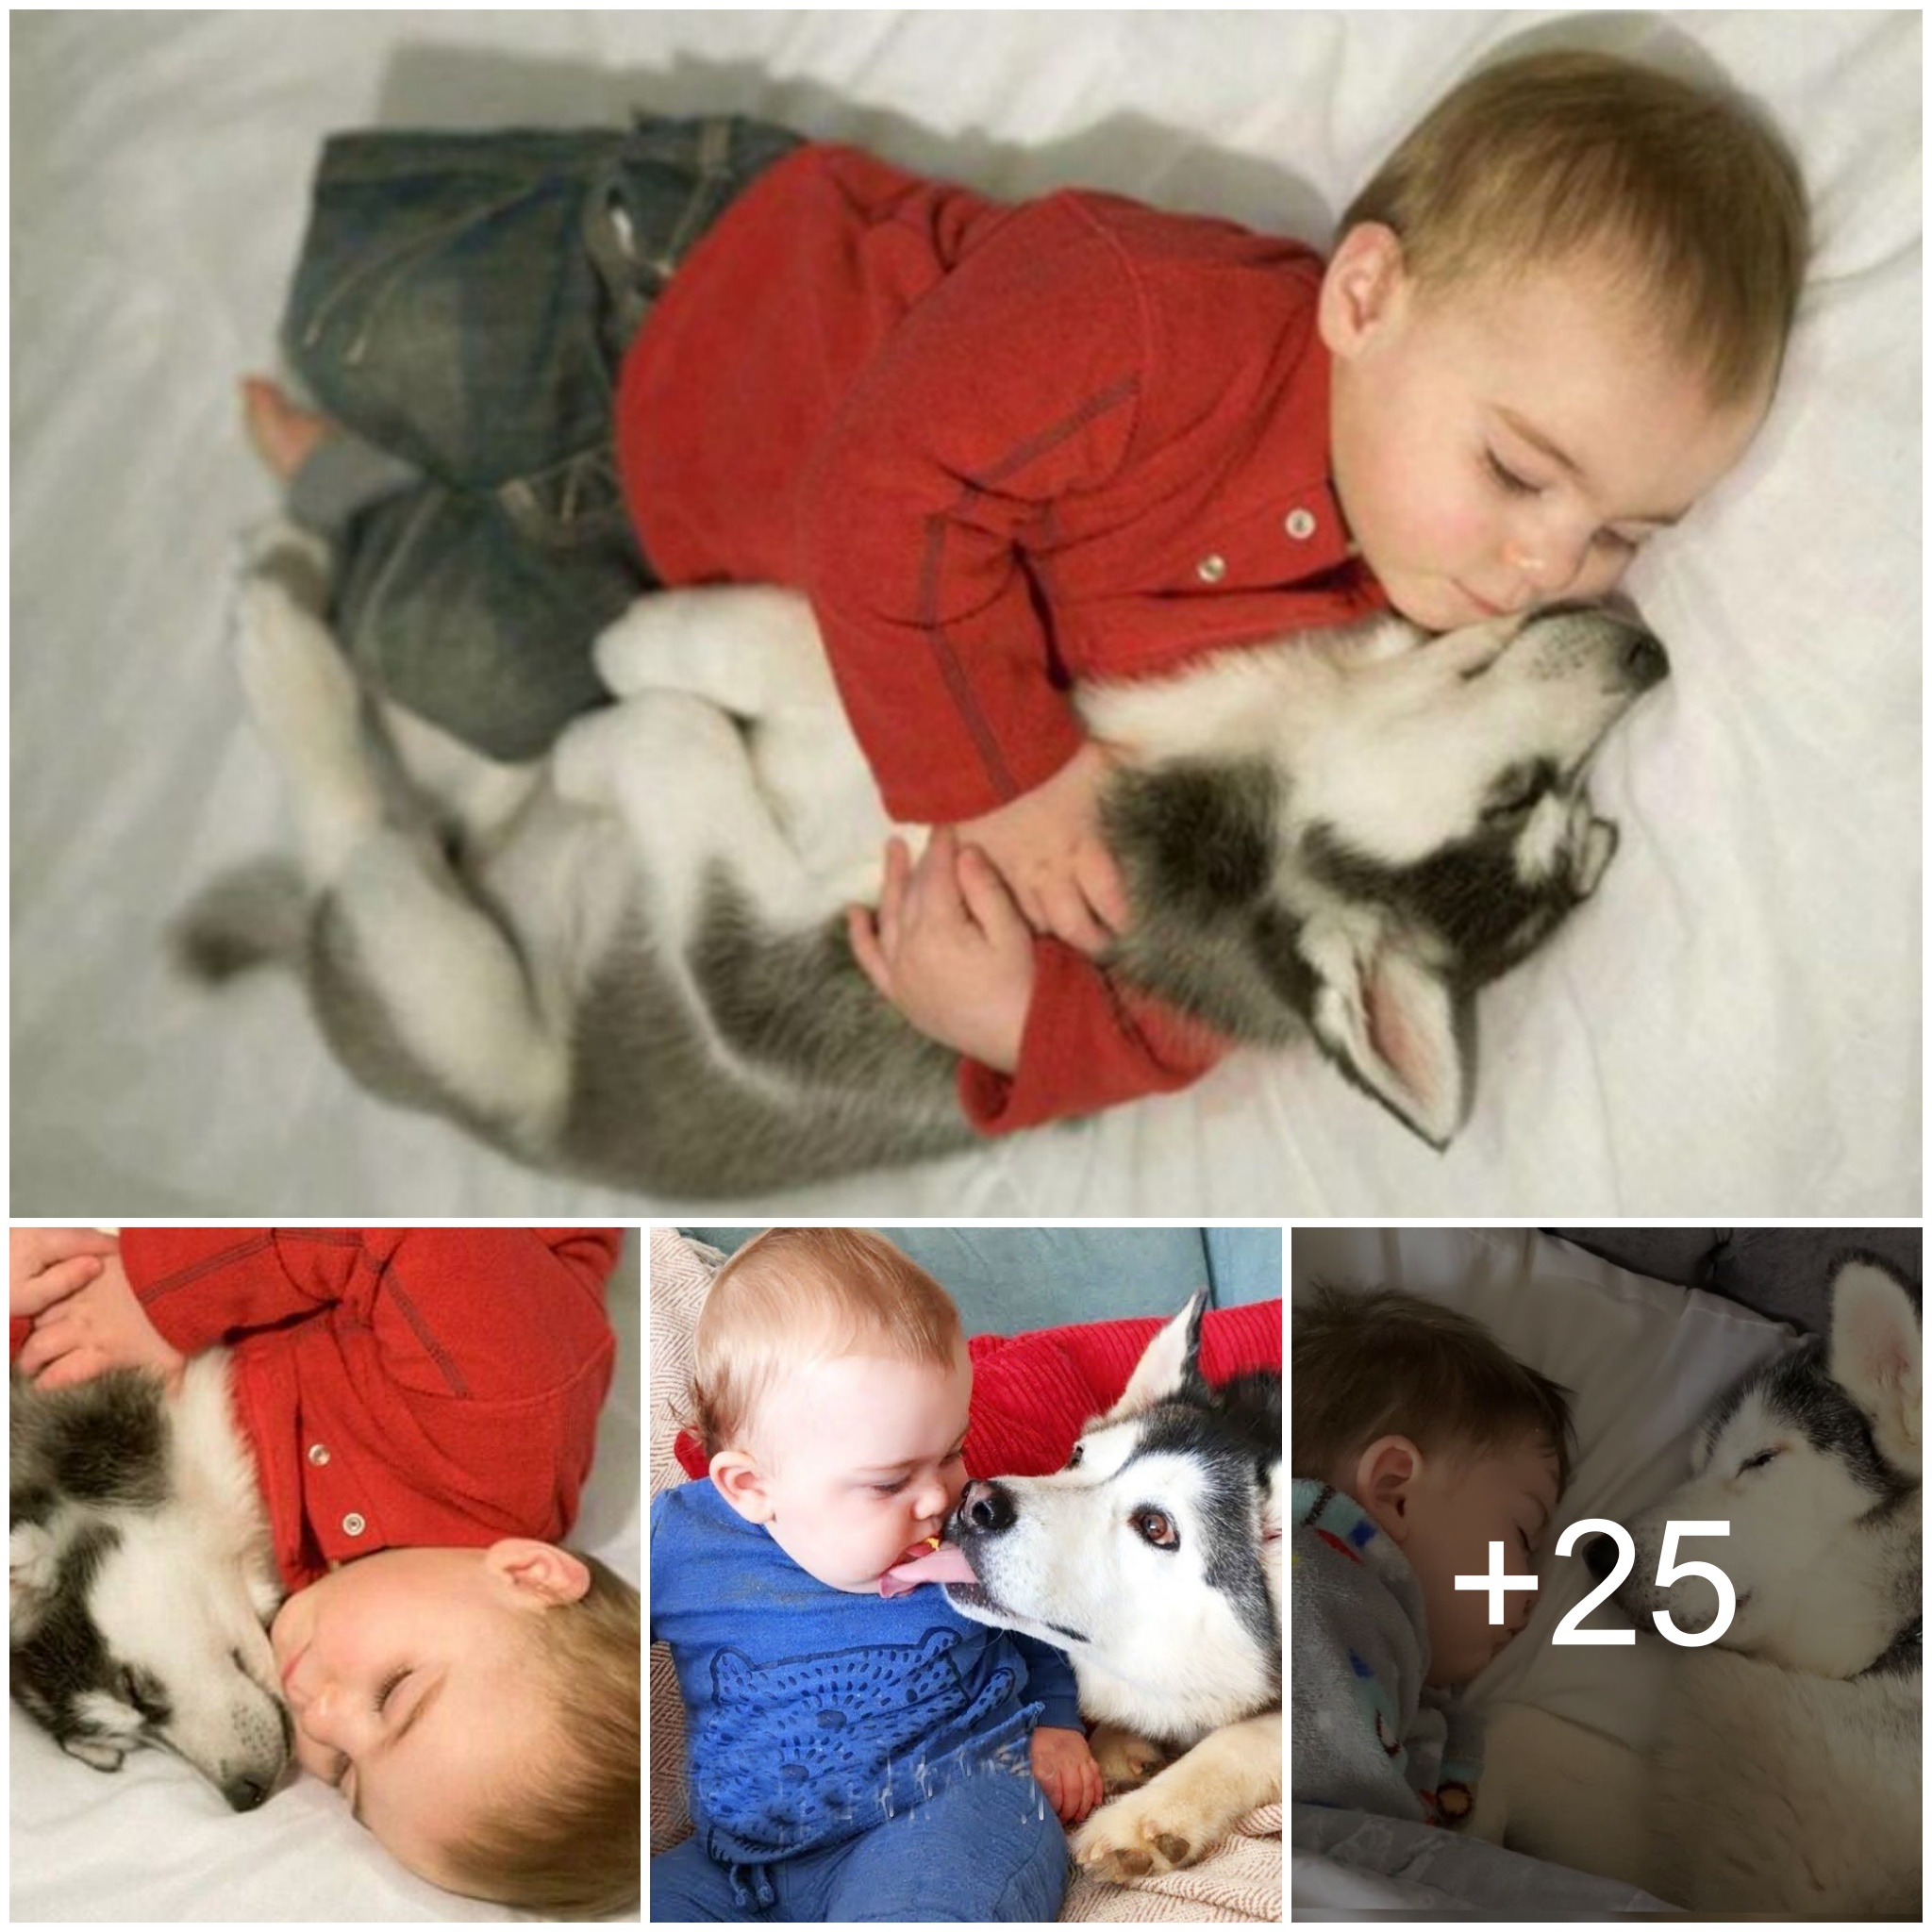 A Tale of Enduring Love: Heartwarming Moments of an Adopted Dog and Baby – Enchanting Online Story of Cute Baby and Dog Sleeping Together